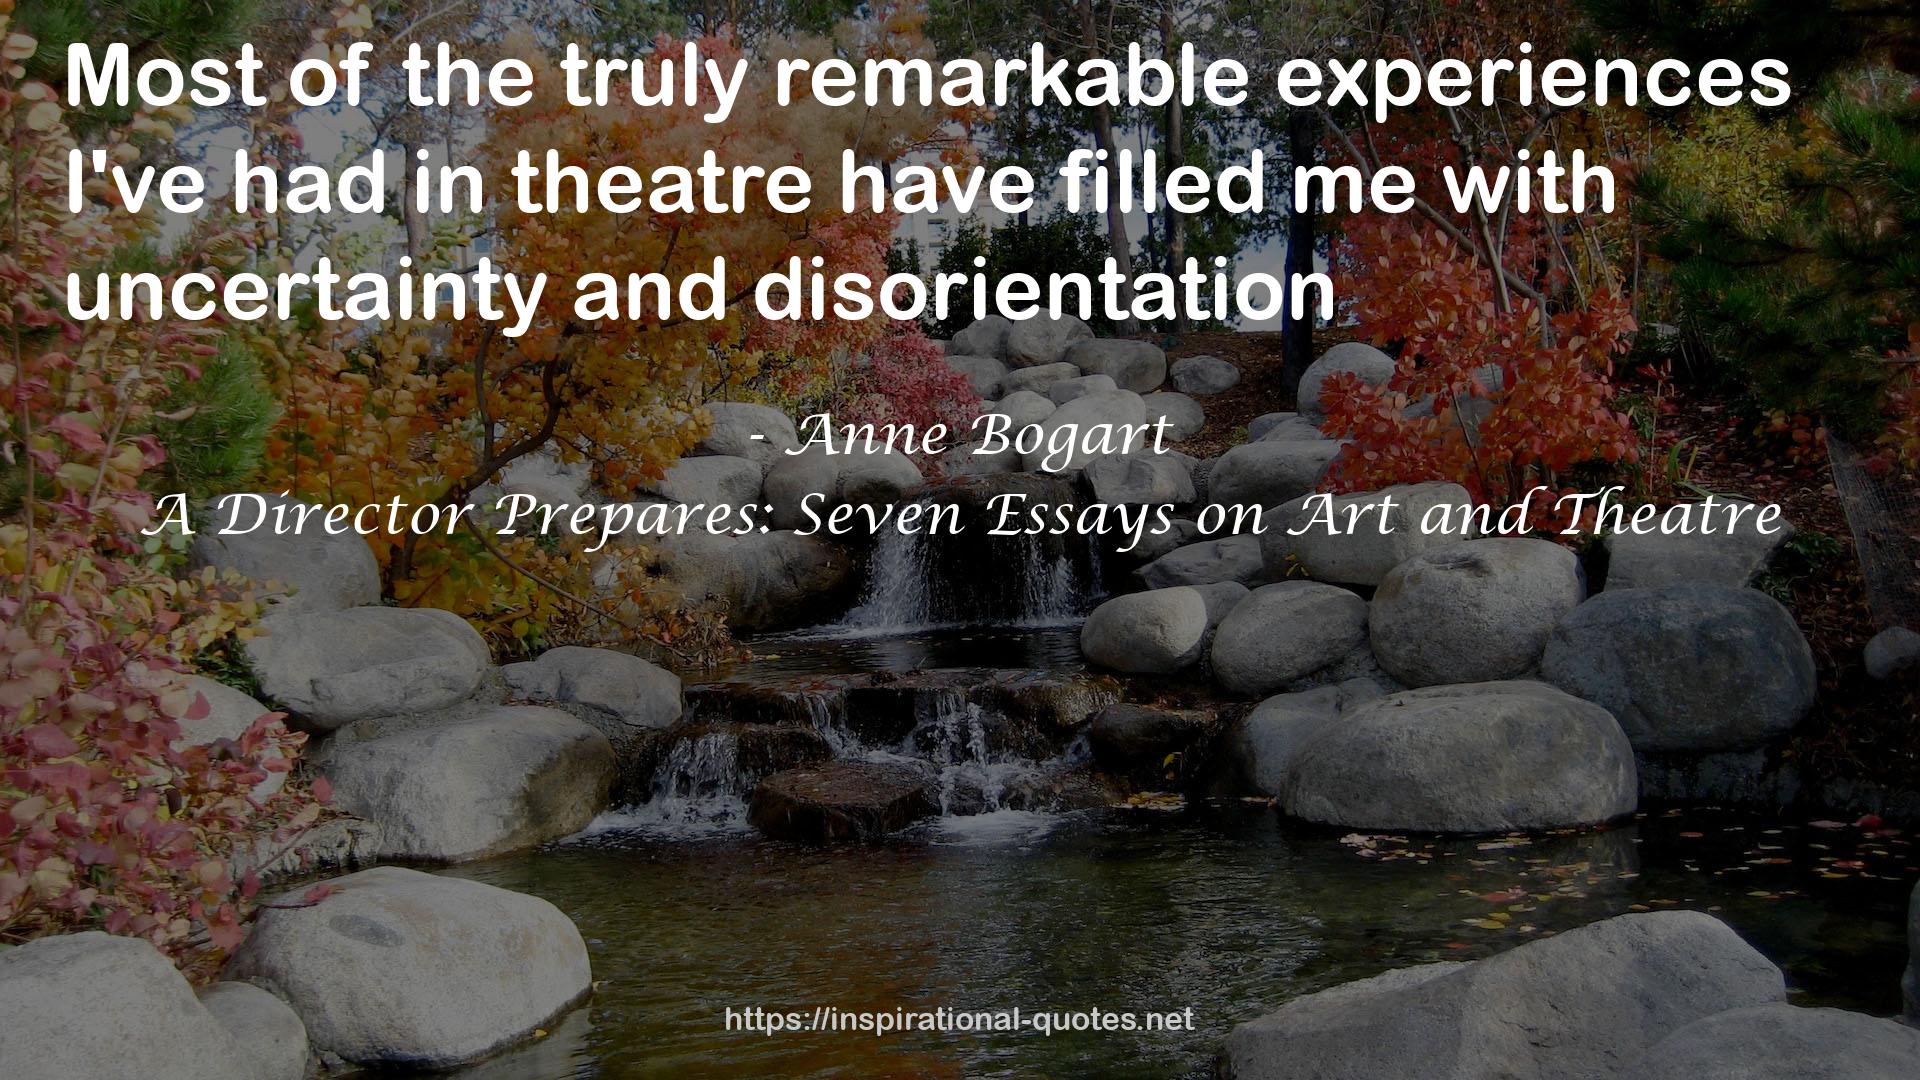 A Director Prepares: Seven Essays on Art and Theatre QUOTES